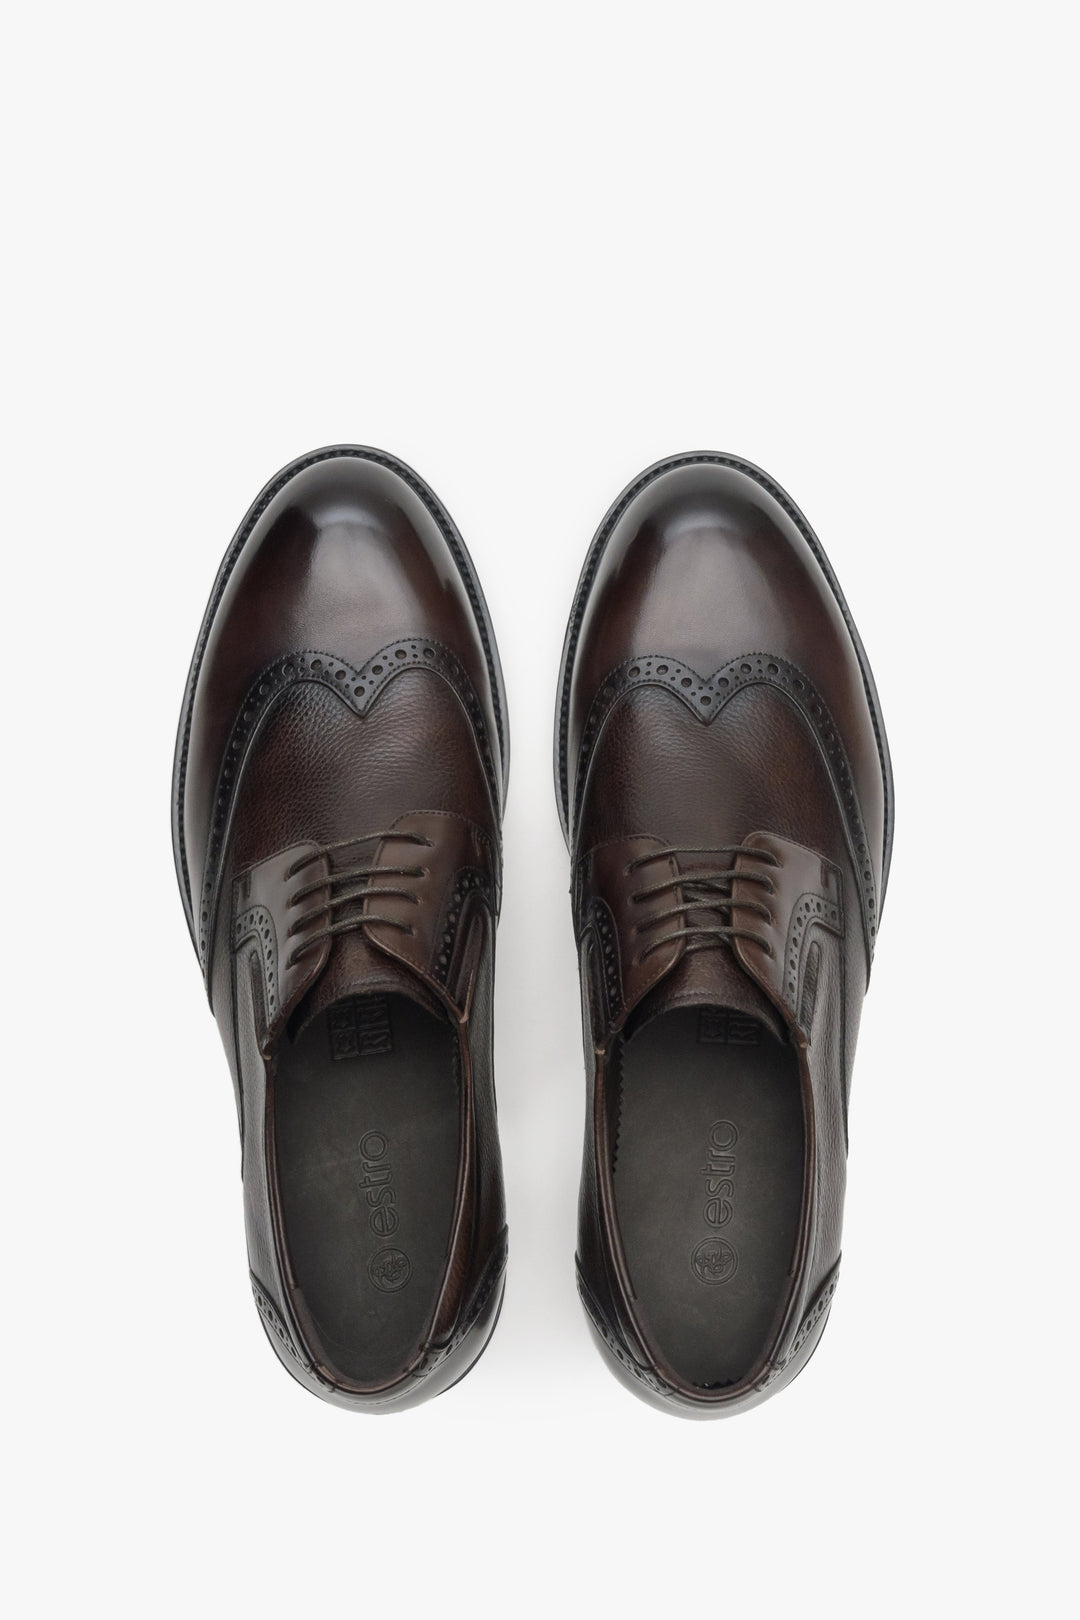 Estro men's brown leather lace-up shoes - top view presentation of the model.